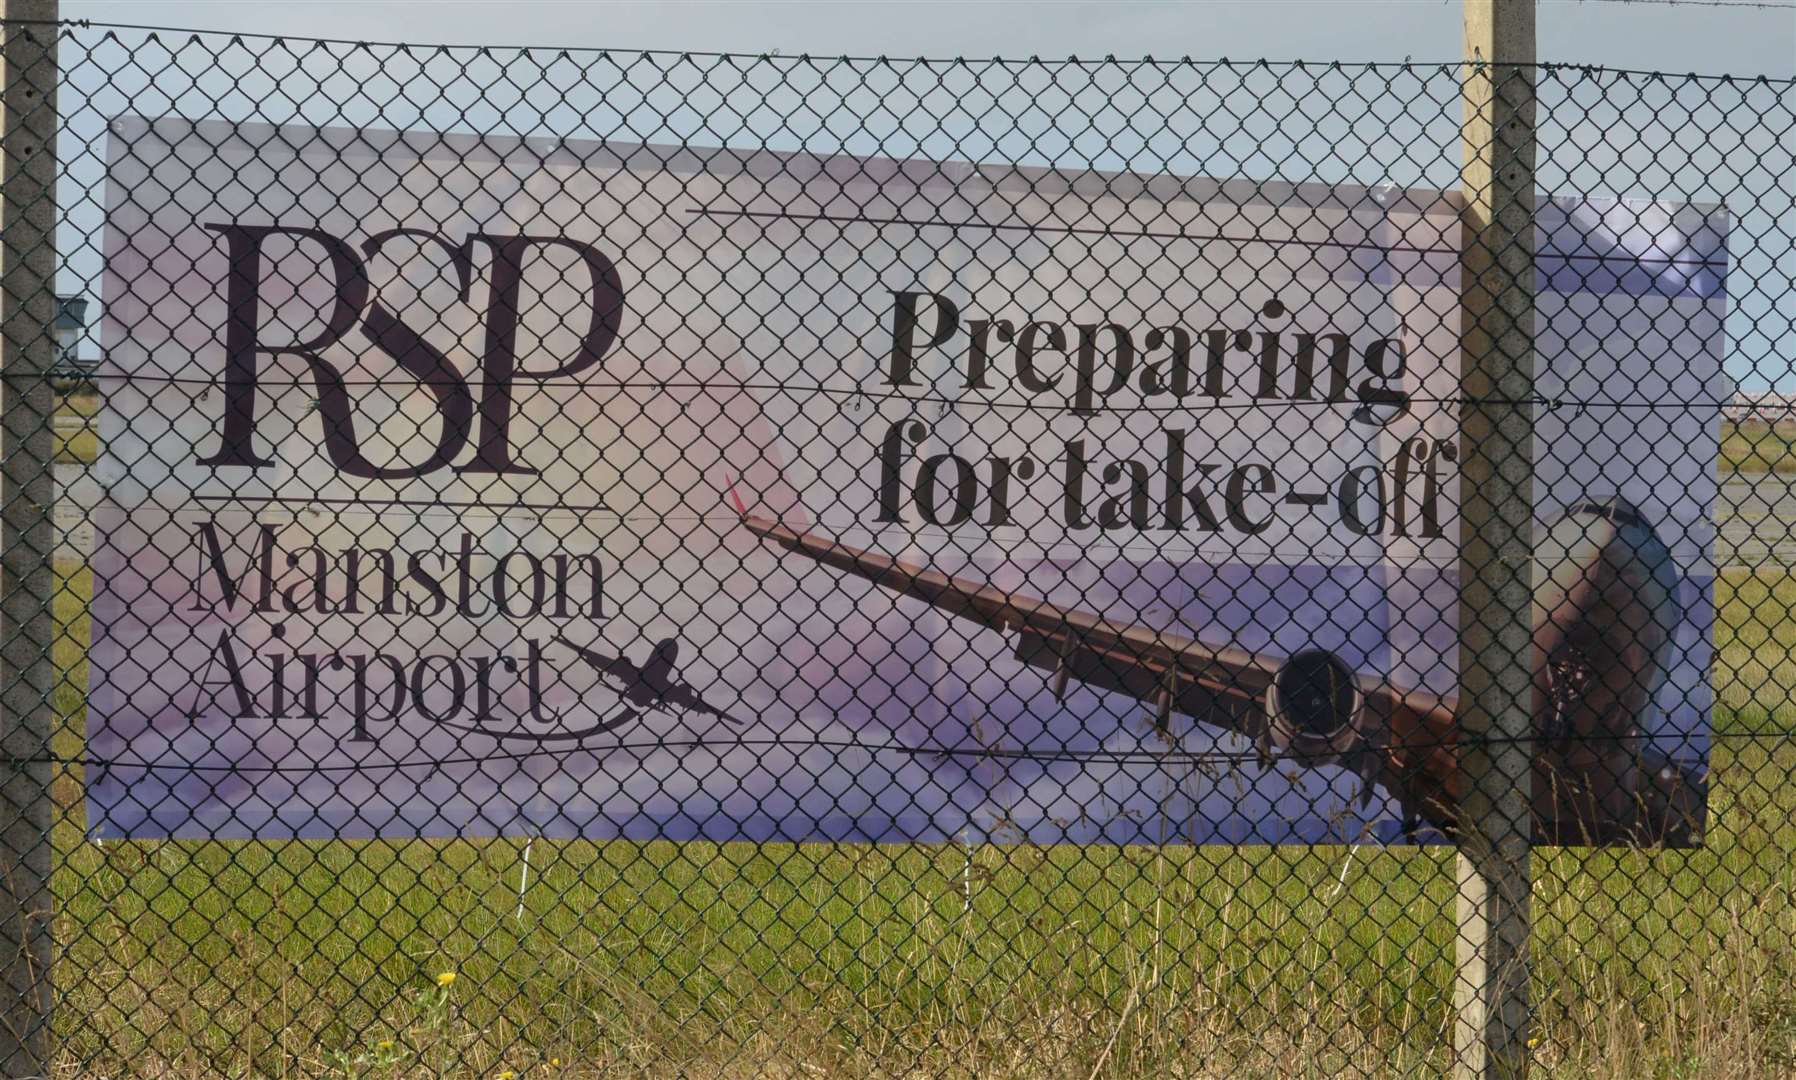 The former Manston Airport. Picture: Chris Davey.